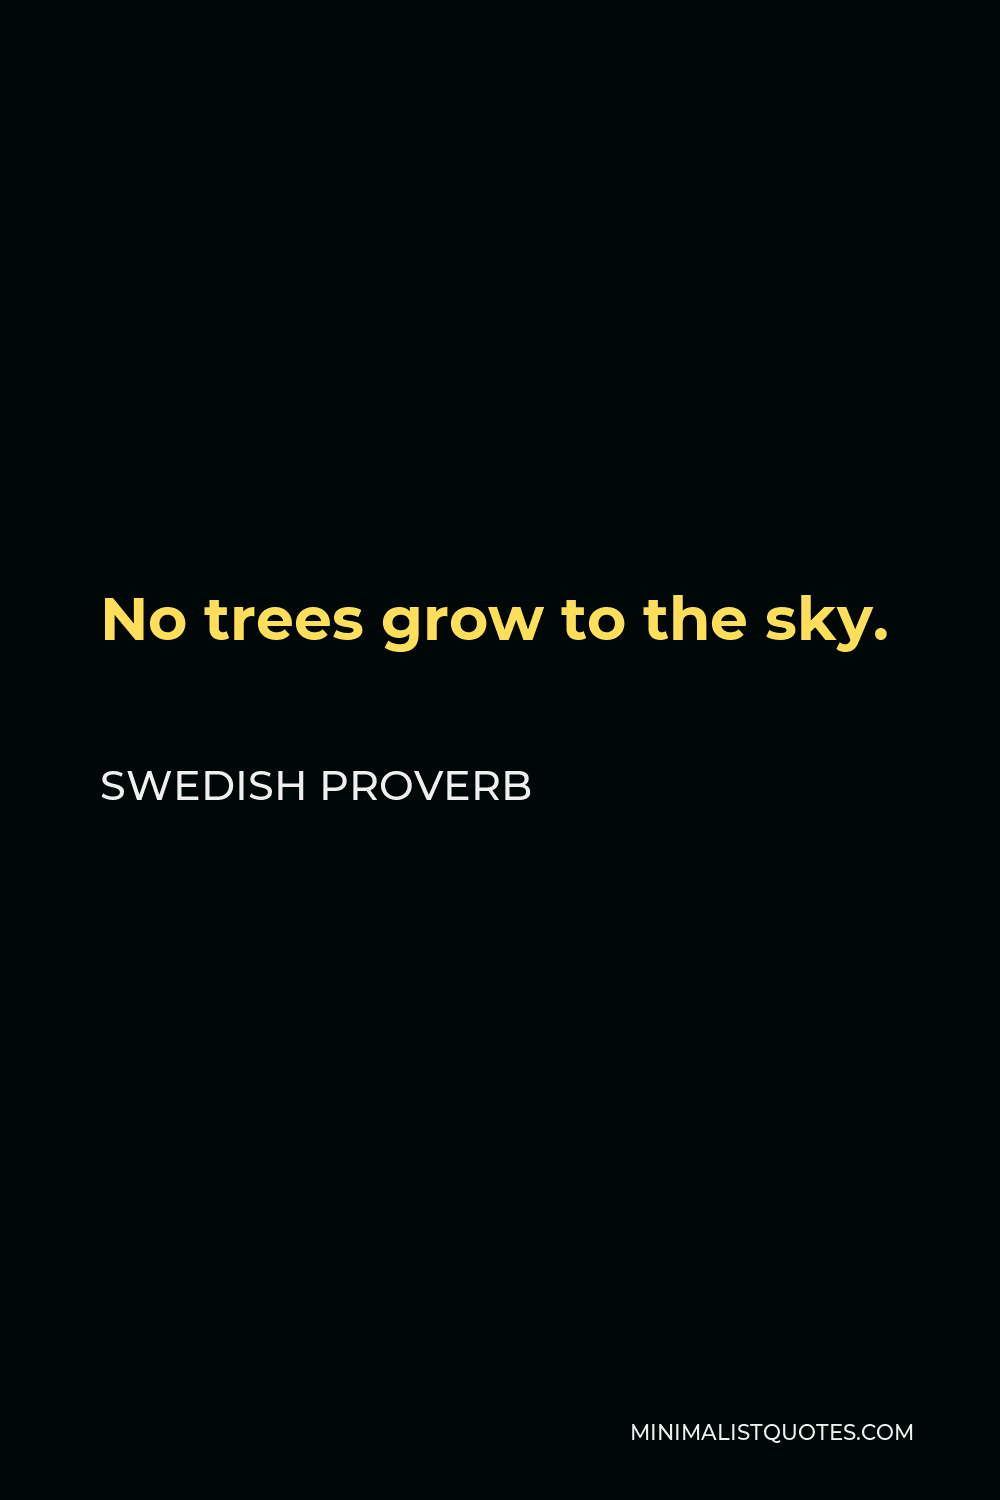 Swedish Proverb Quote - No trees grow to the sky.